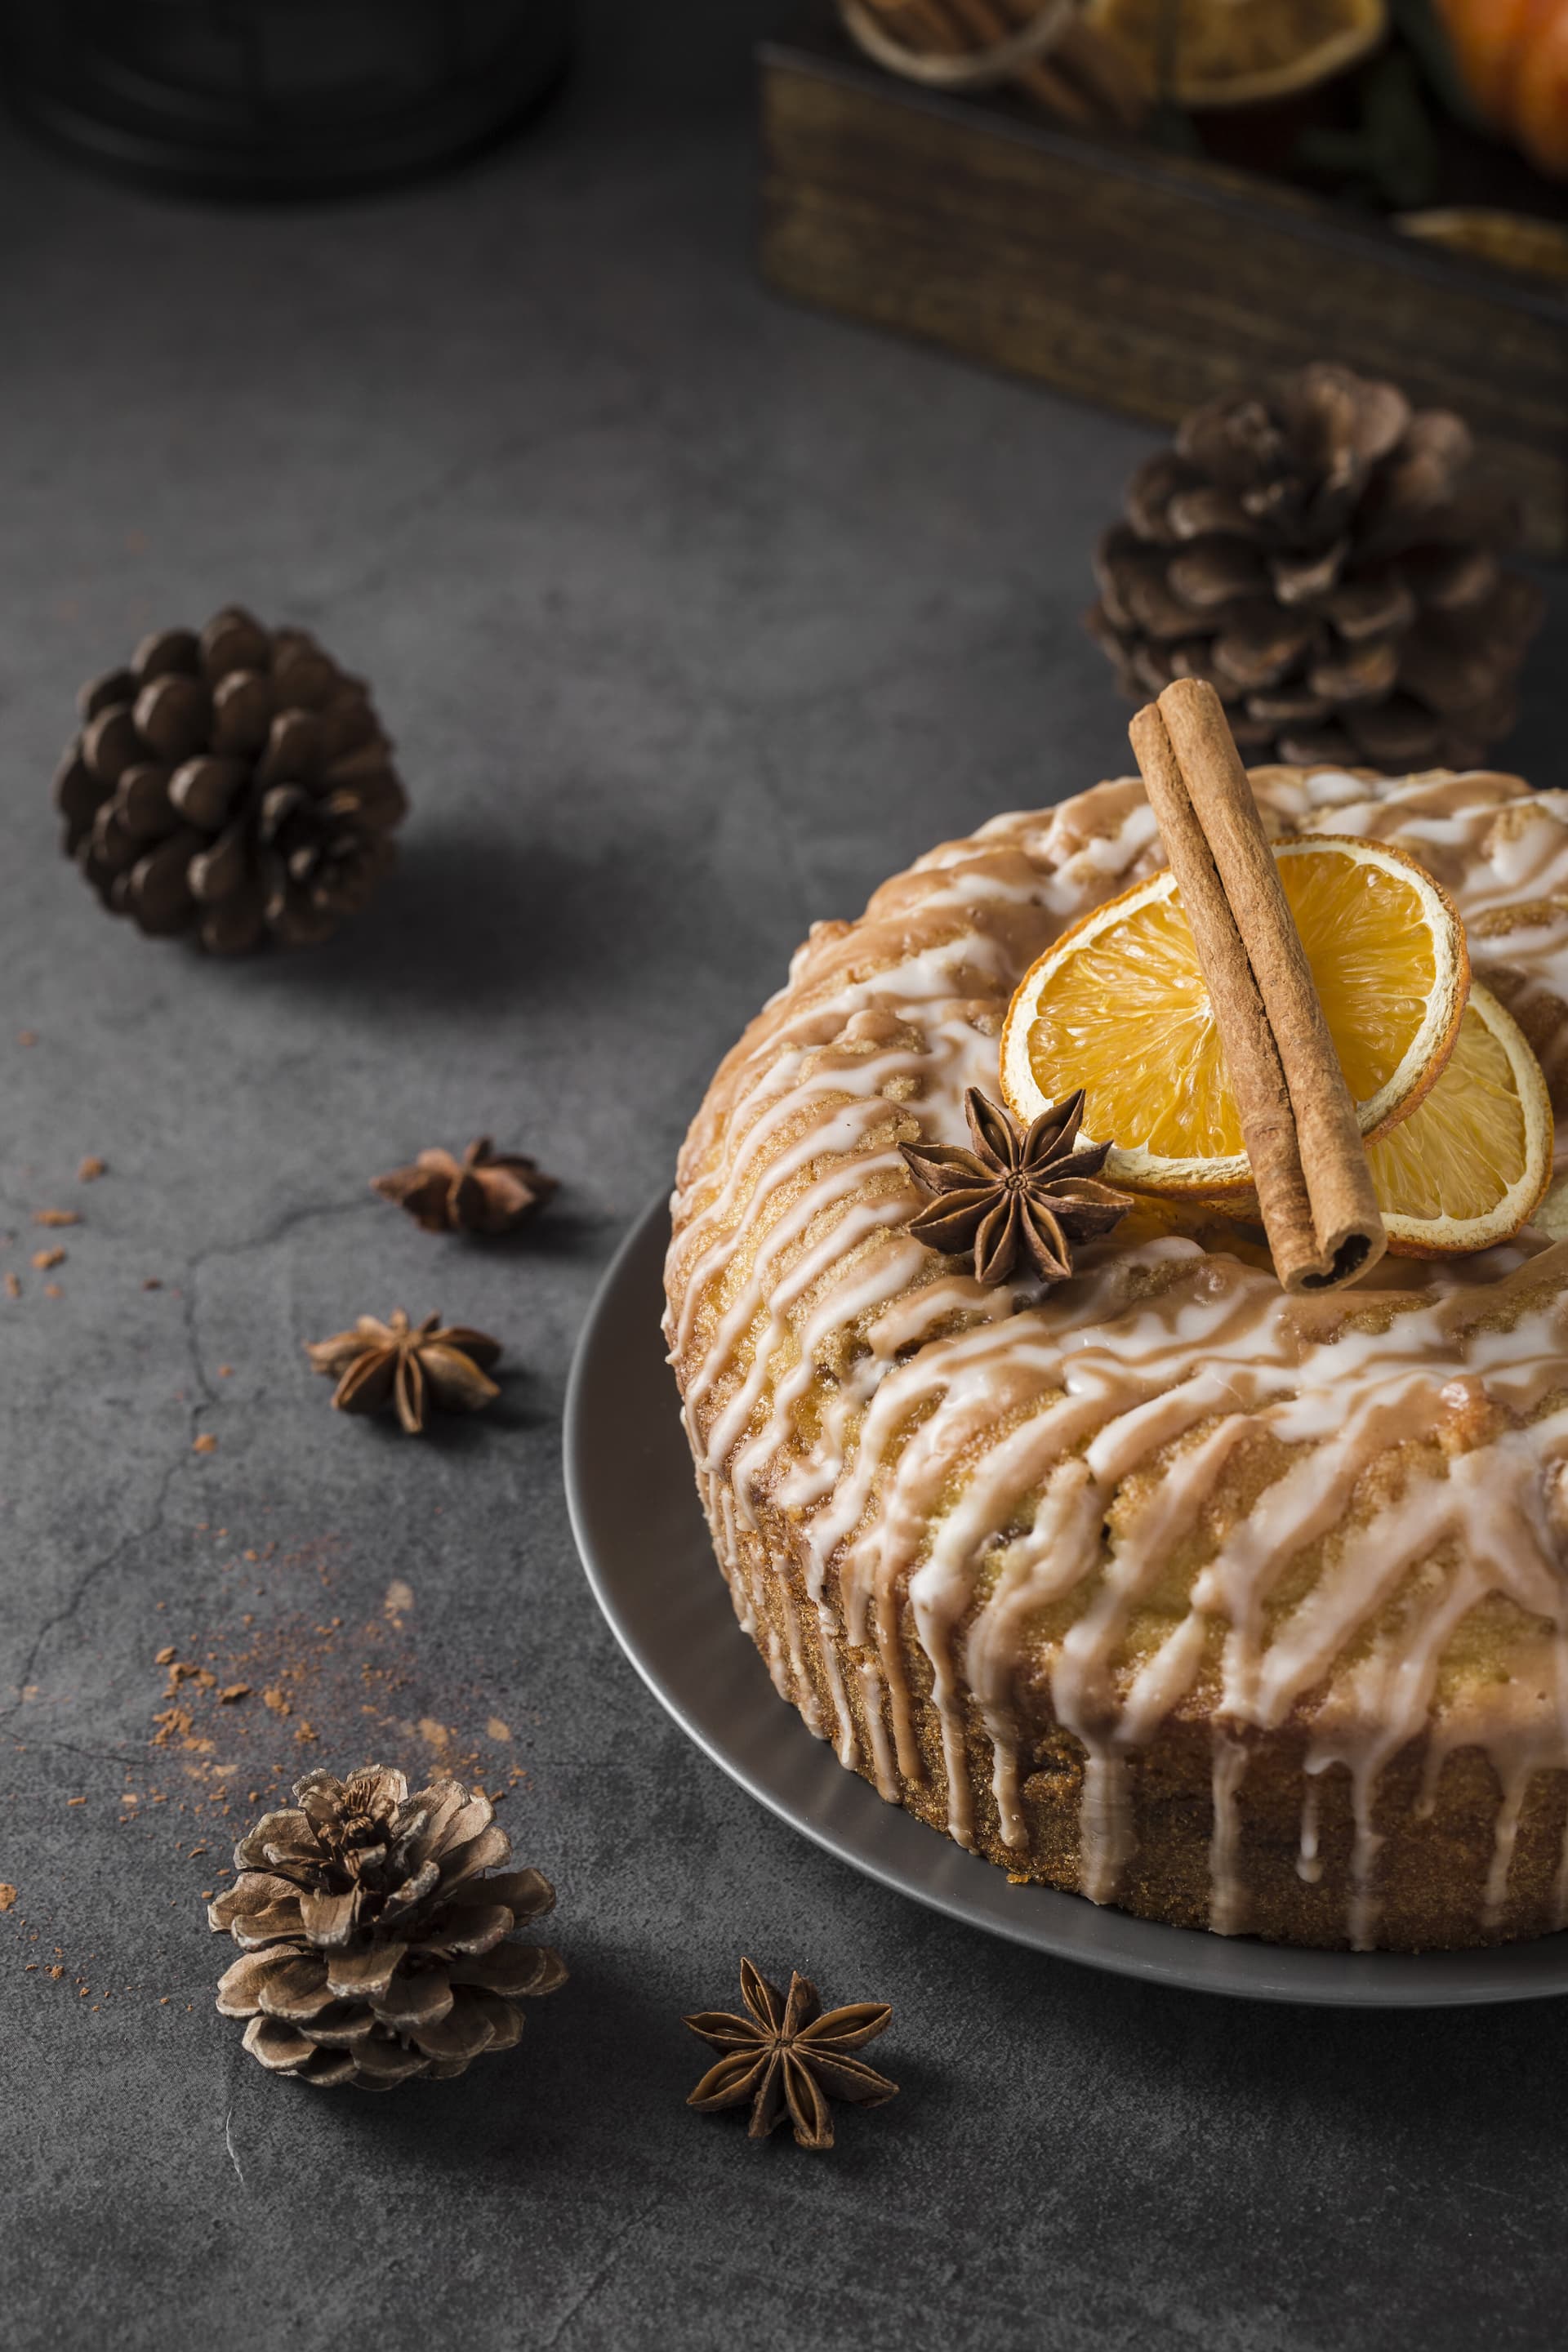 Black Dog Ginger Spiced Cake: Don't Wait For Christmas To Try This Recipe